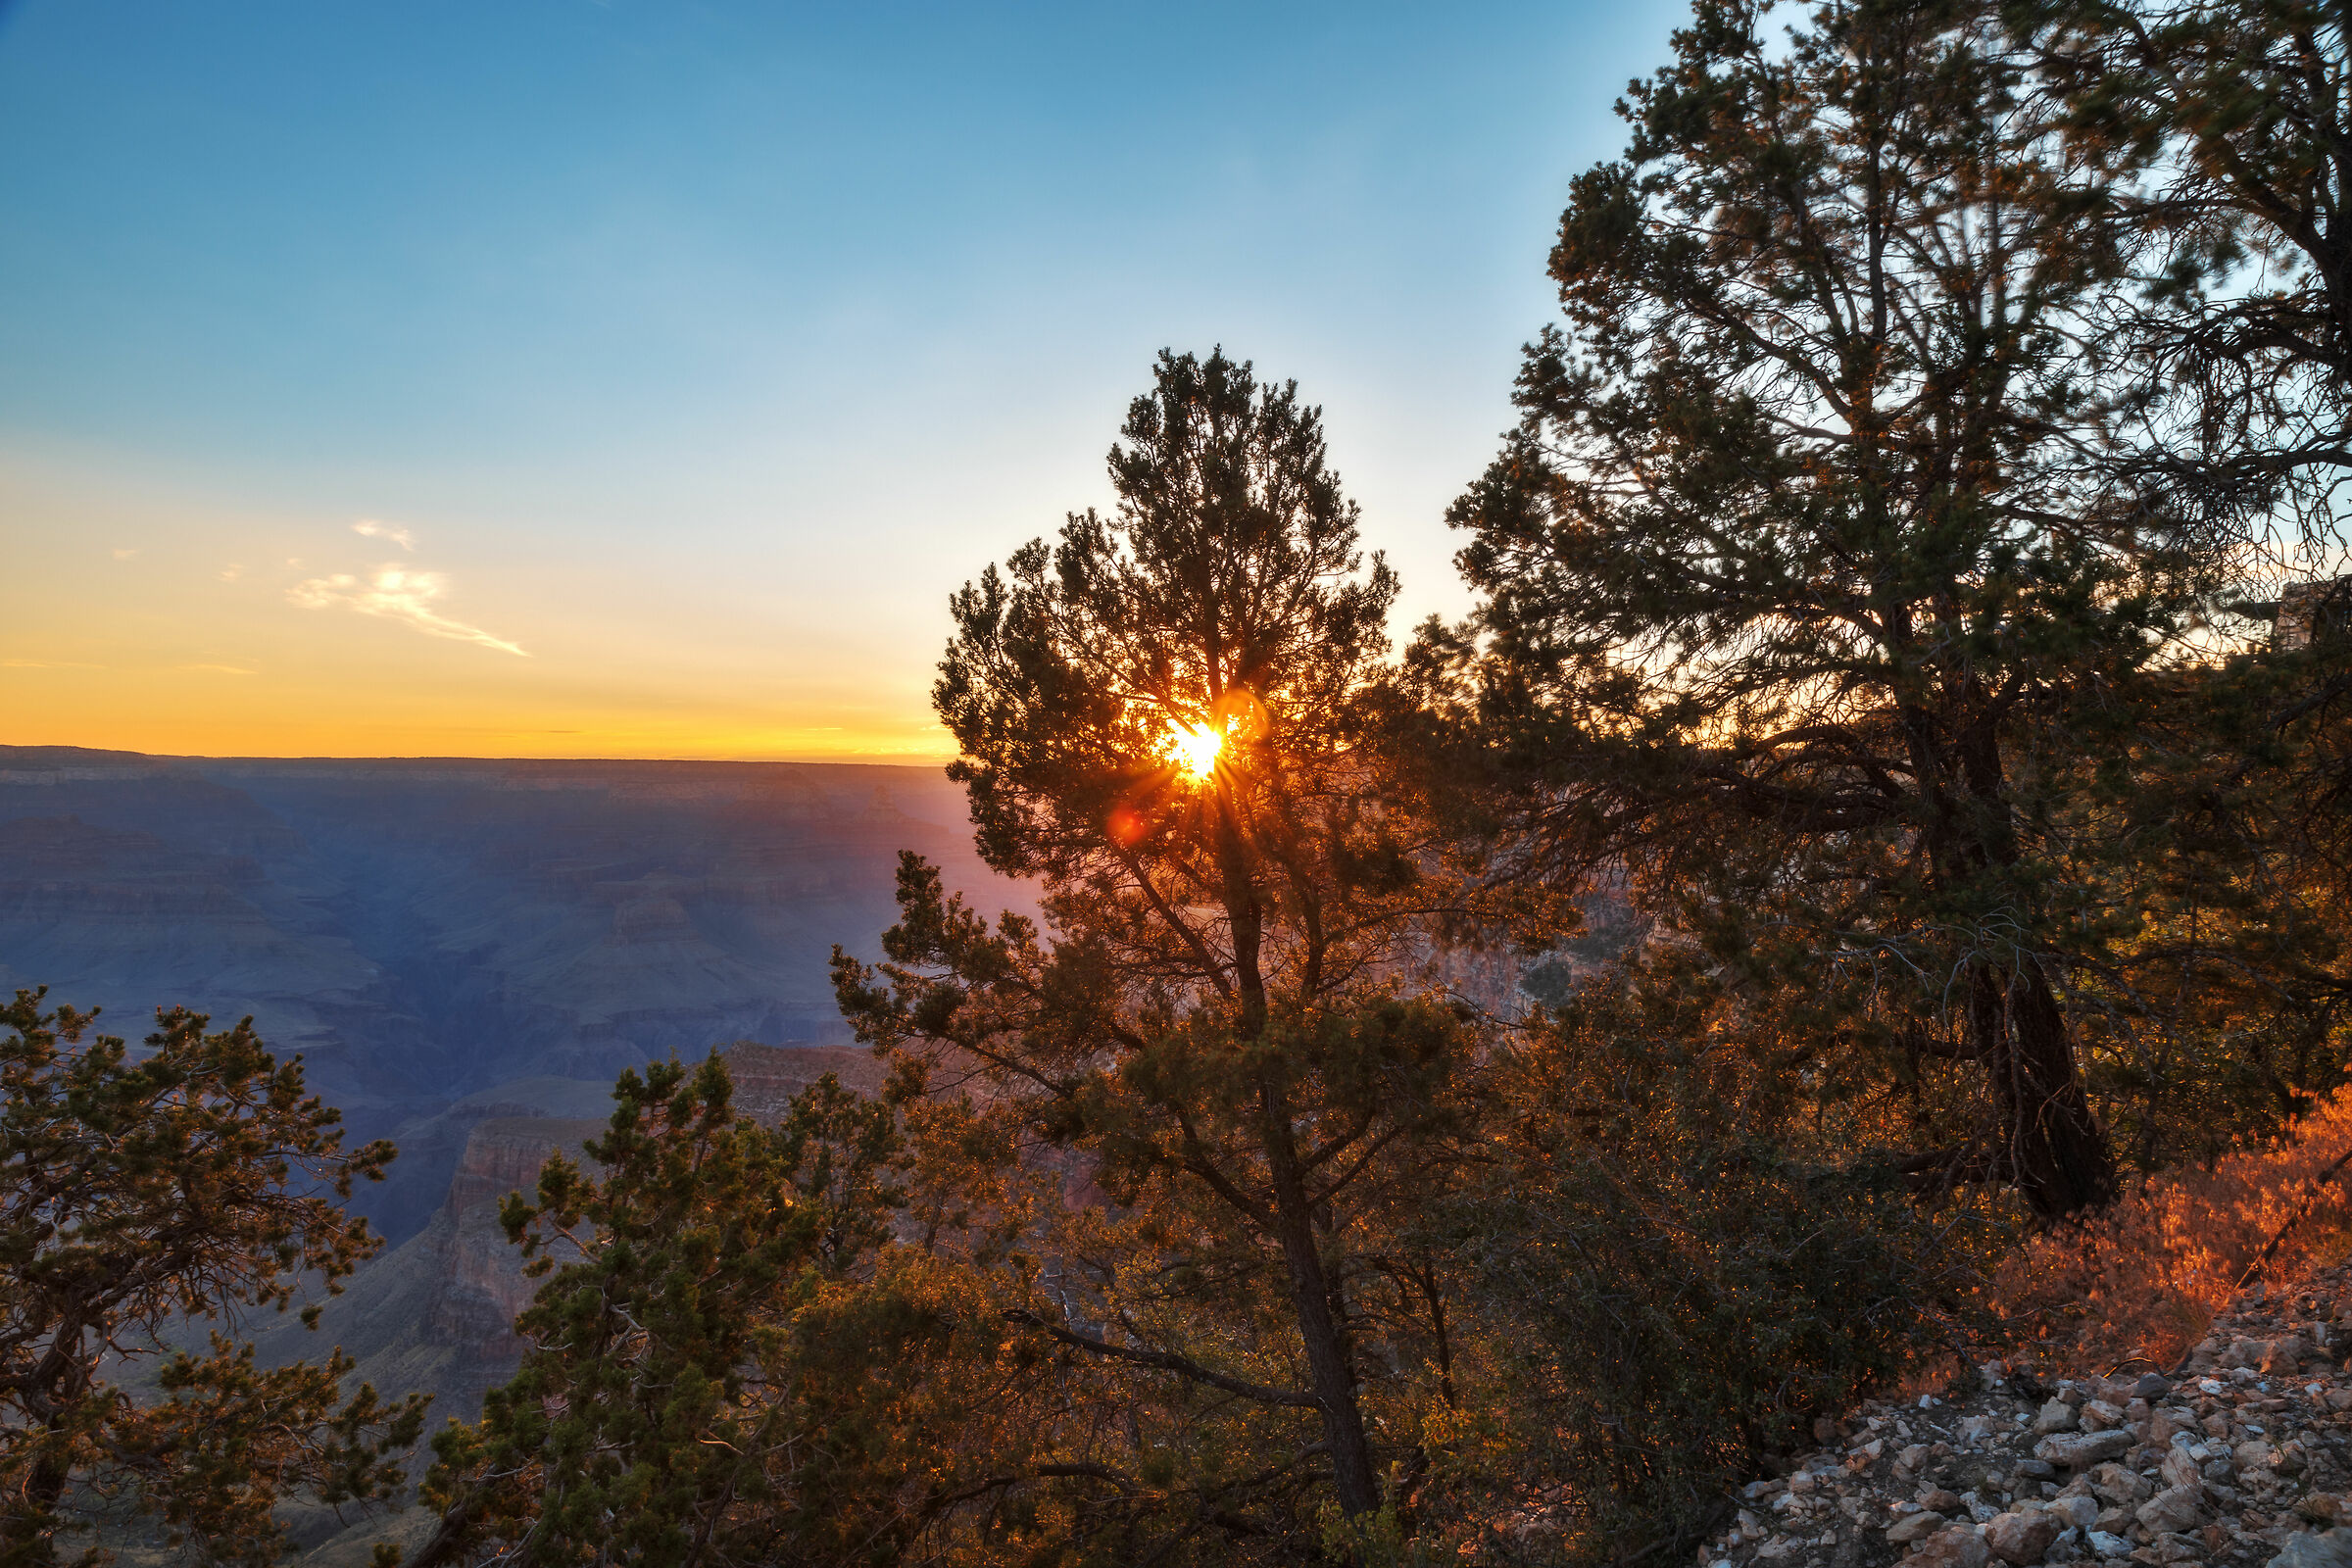 Sunrise at the Grand Canyon...